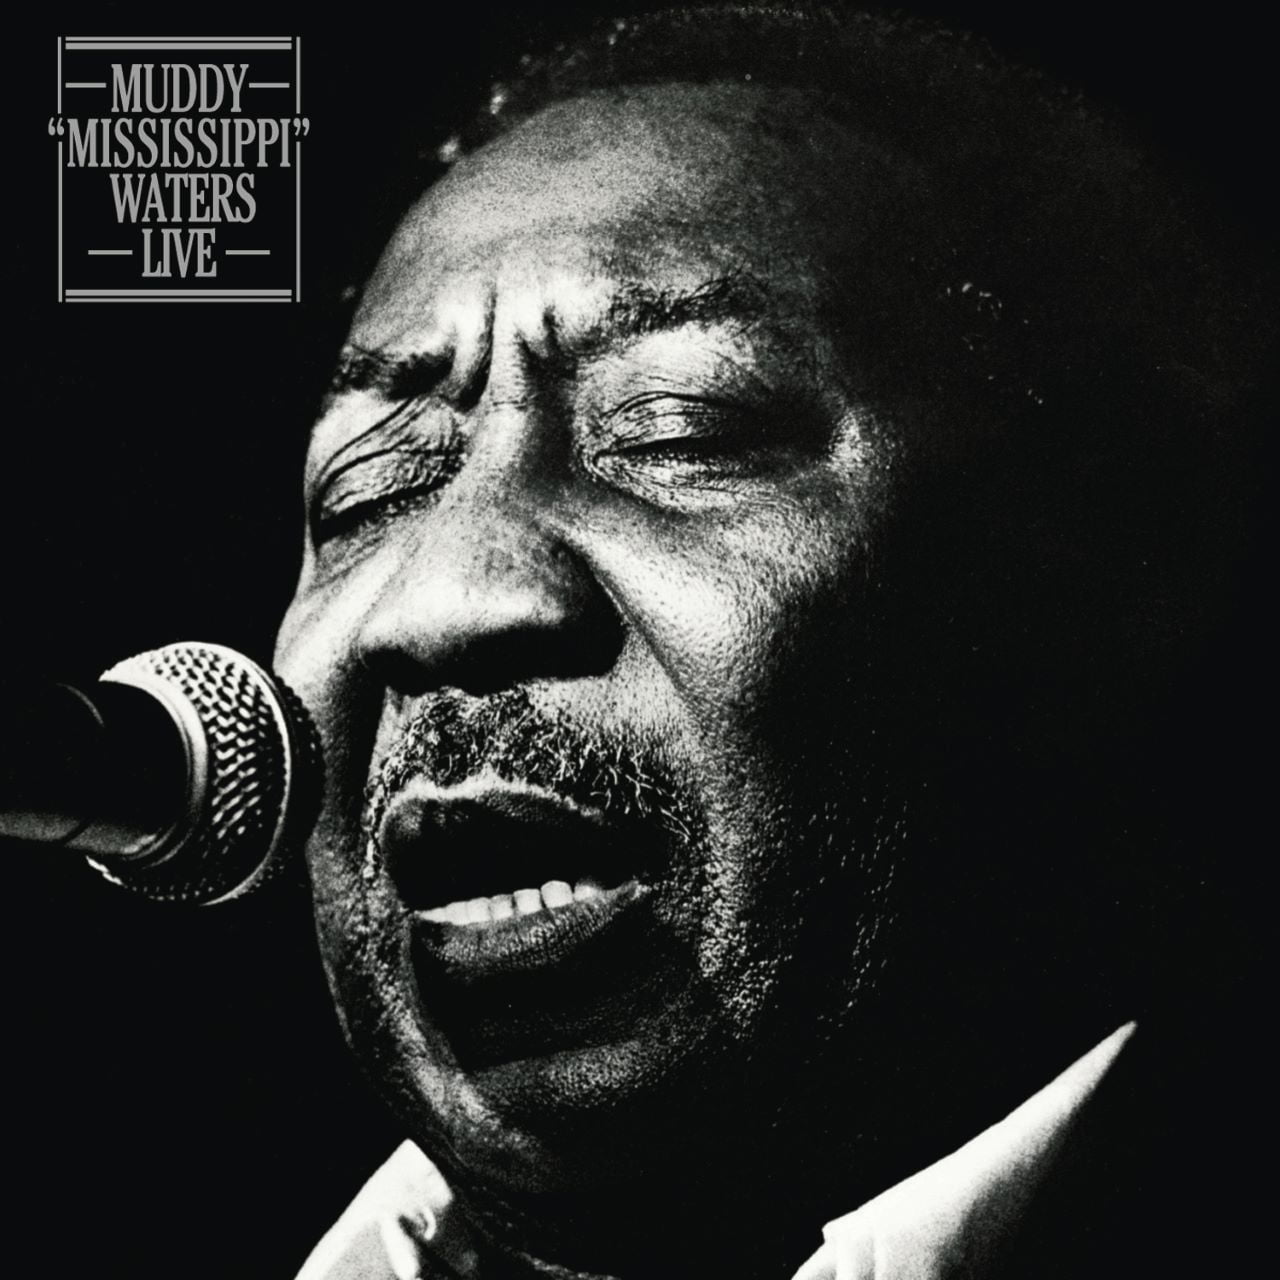 Muddy-Waters-Muddy-Mississippi-Waters-Live cover album